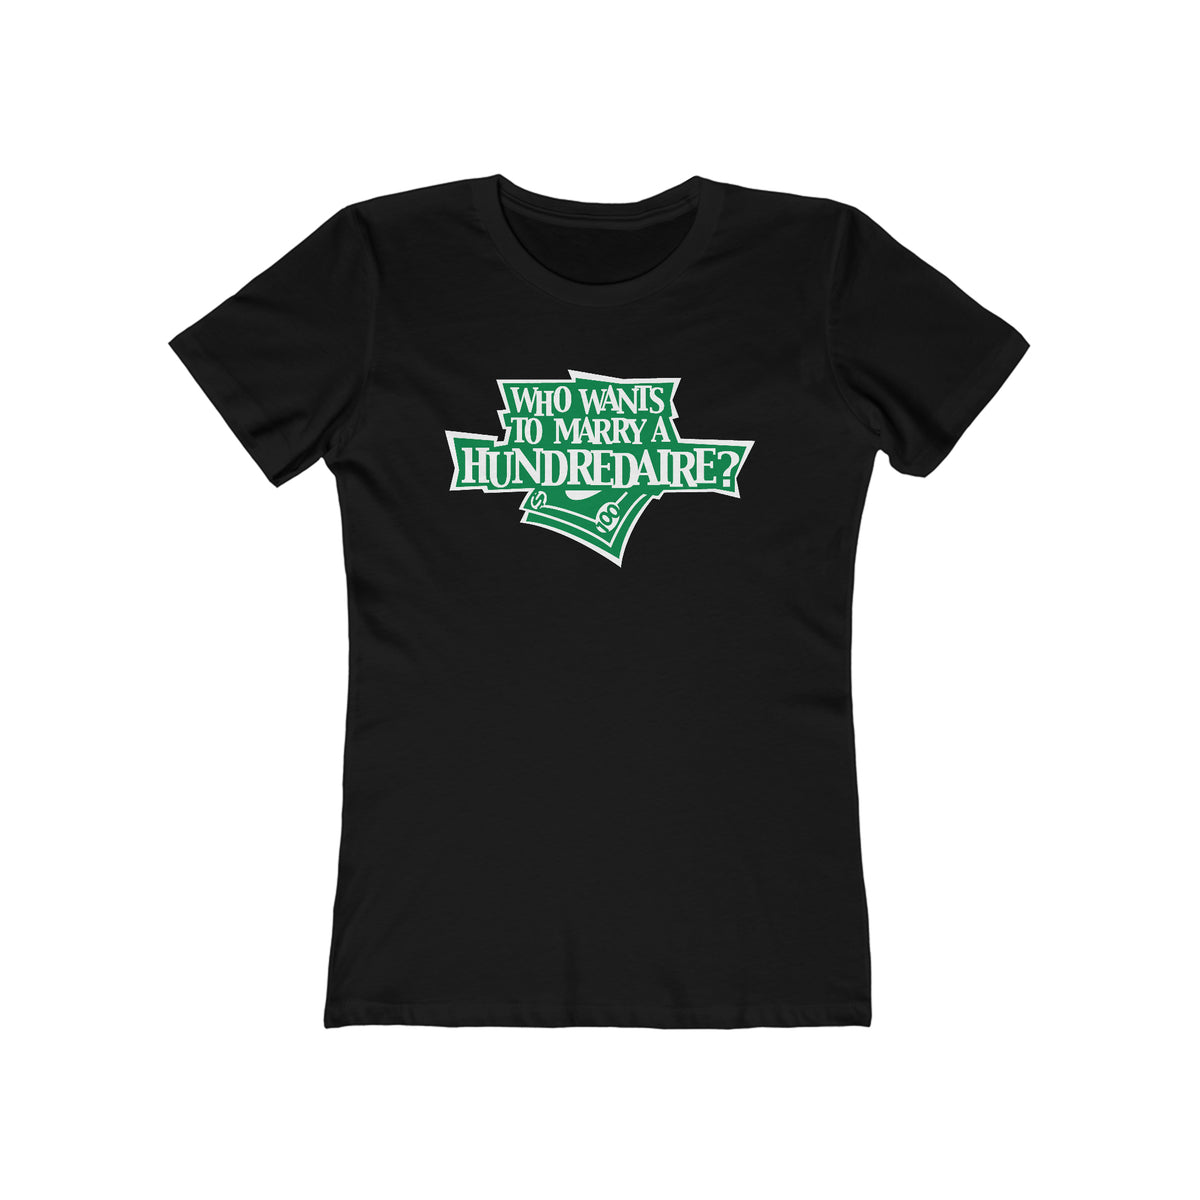 Who Wants To Marry A Hundredaire? - Women’s T-Shirt